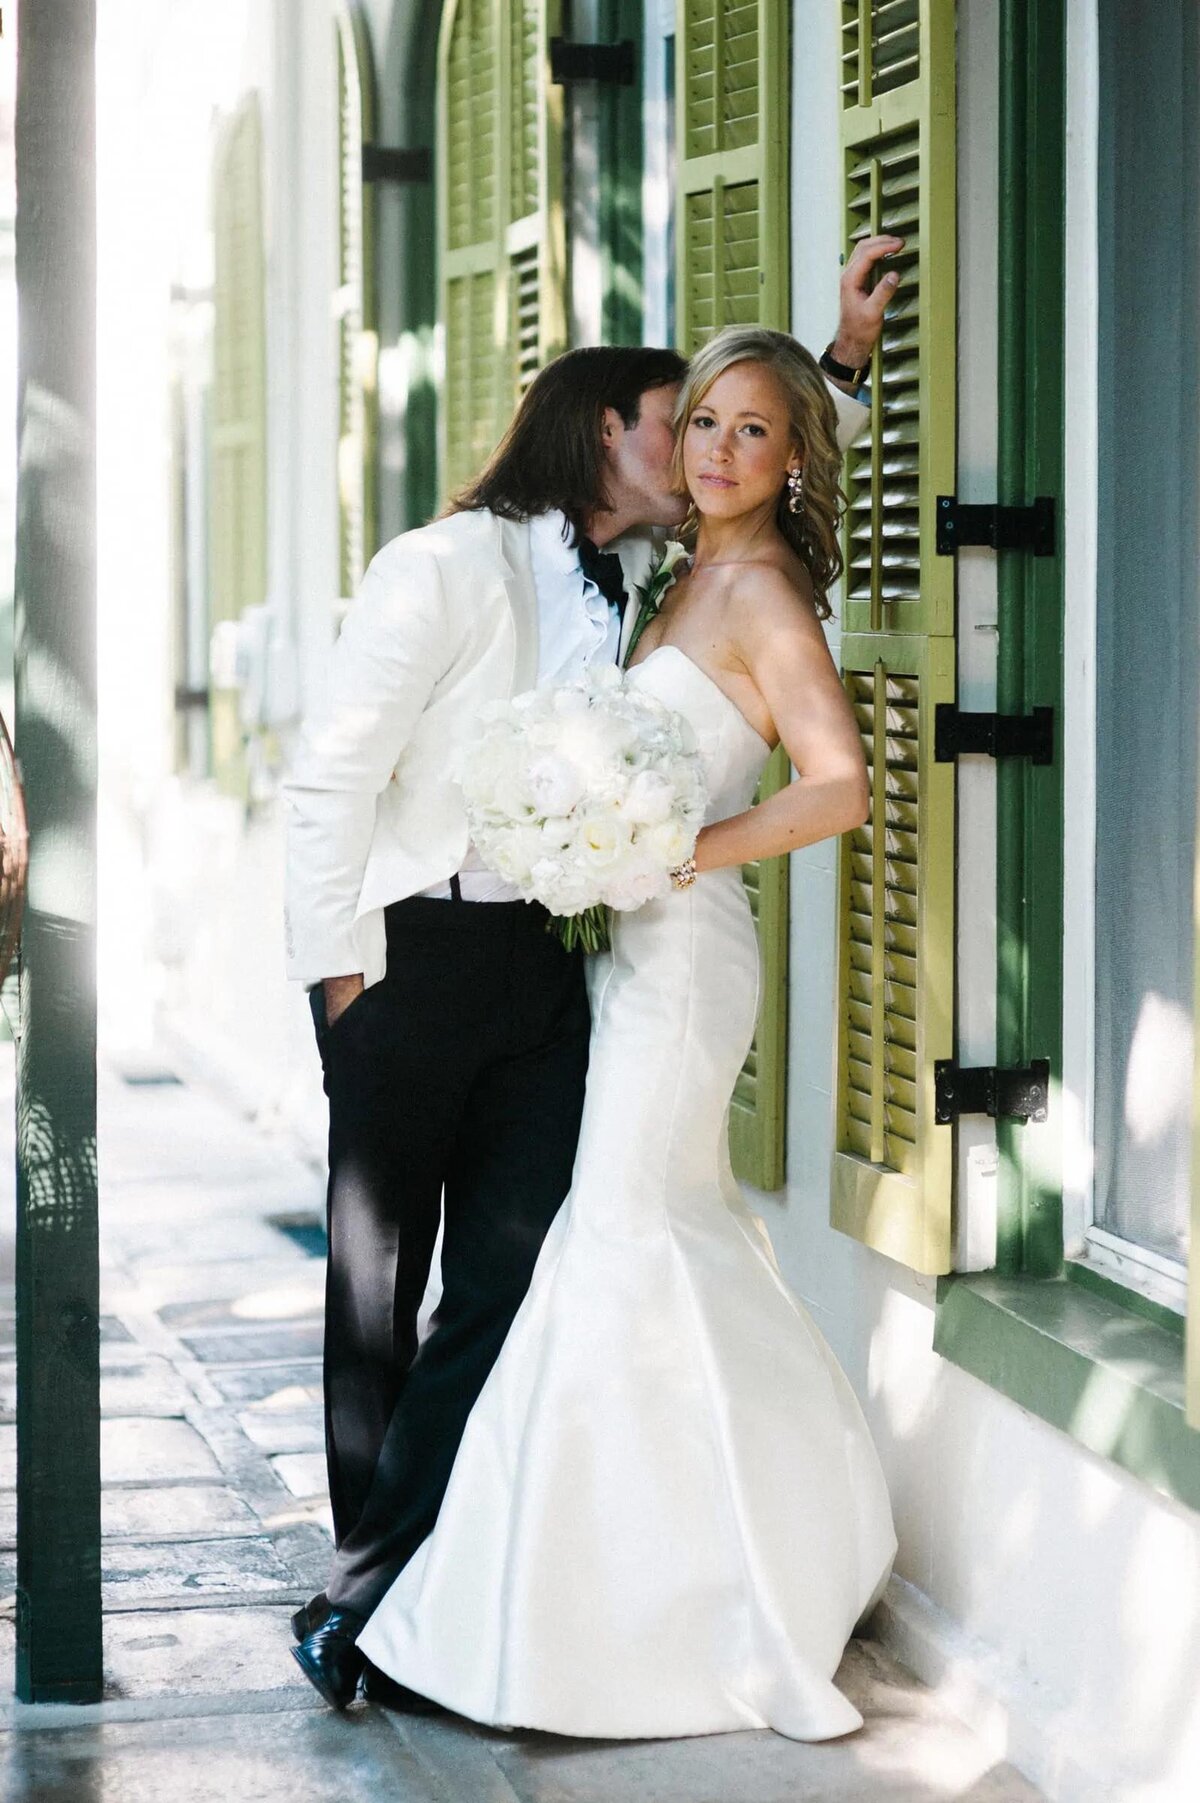 A bride leans against a wall in an elegant, form-fitting wedding gown, receiving a kiss from her groom on a sunlit street